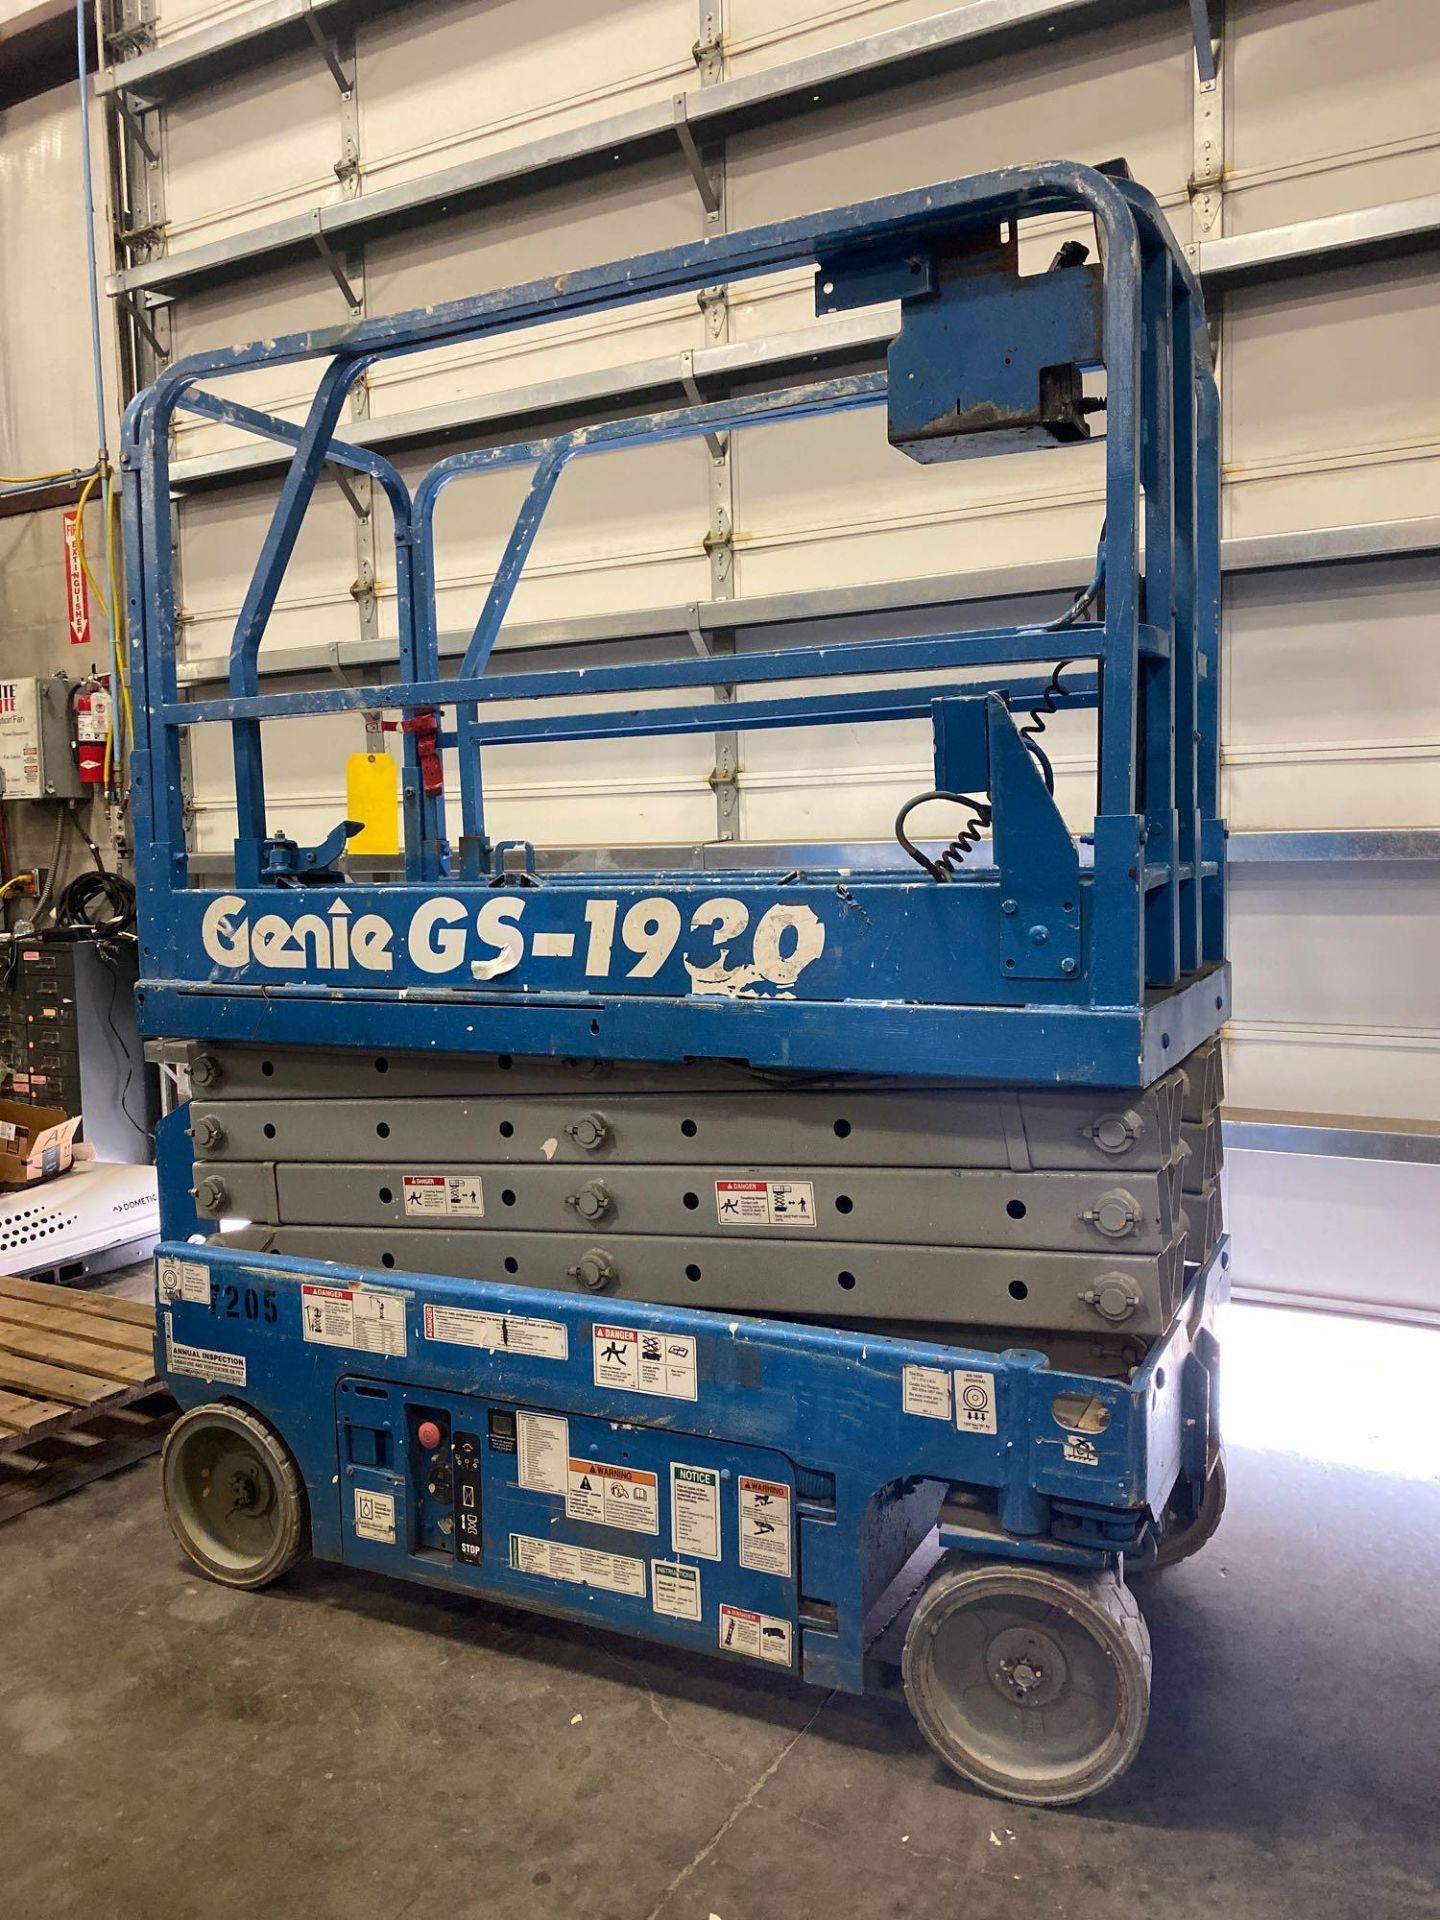 GENIE GS-1930 ELECTRIC SCISSOR LIFT, SELF PROPELLED, 19' PLATFORM HEIGHT, 500 LB CAPACITY, SLIDE OUT